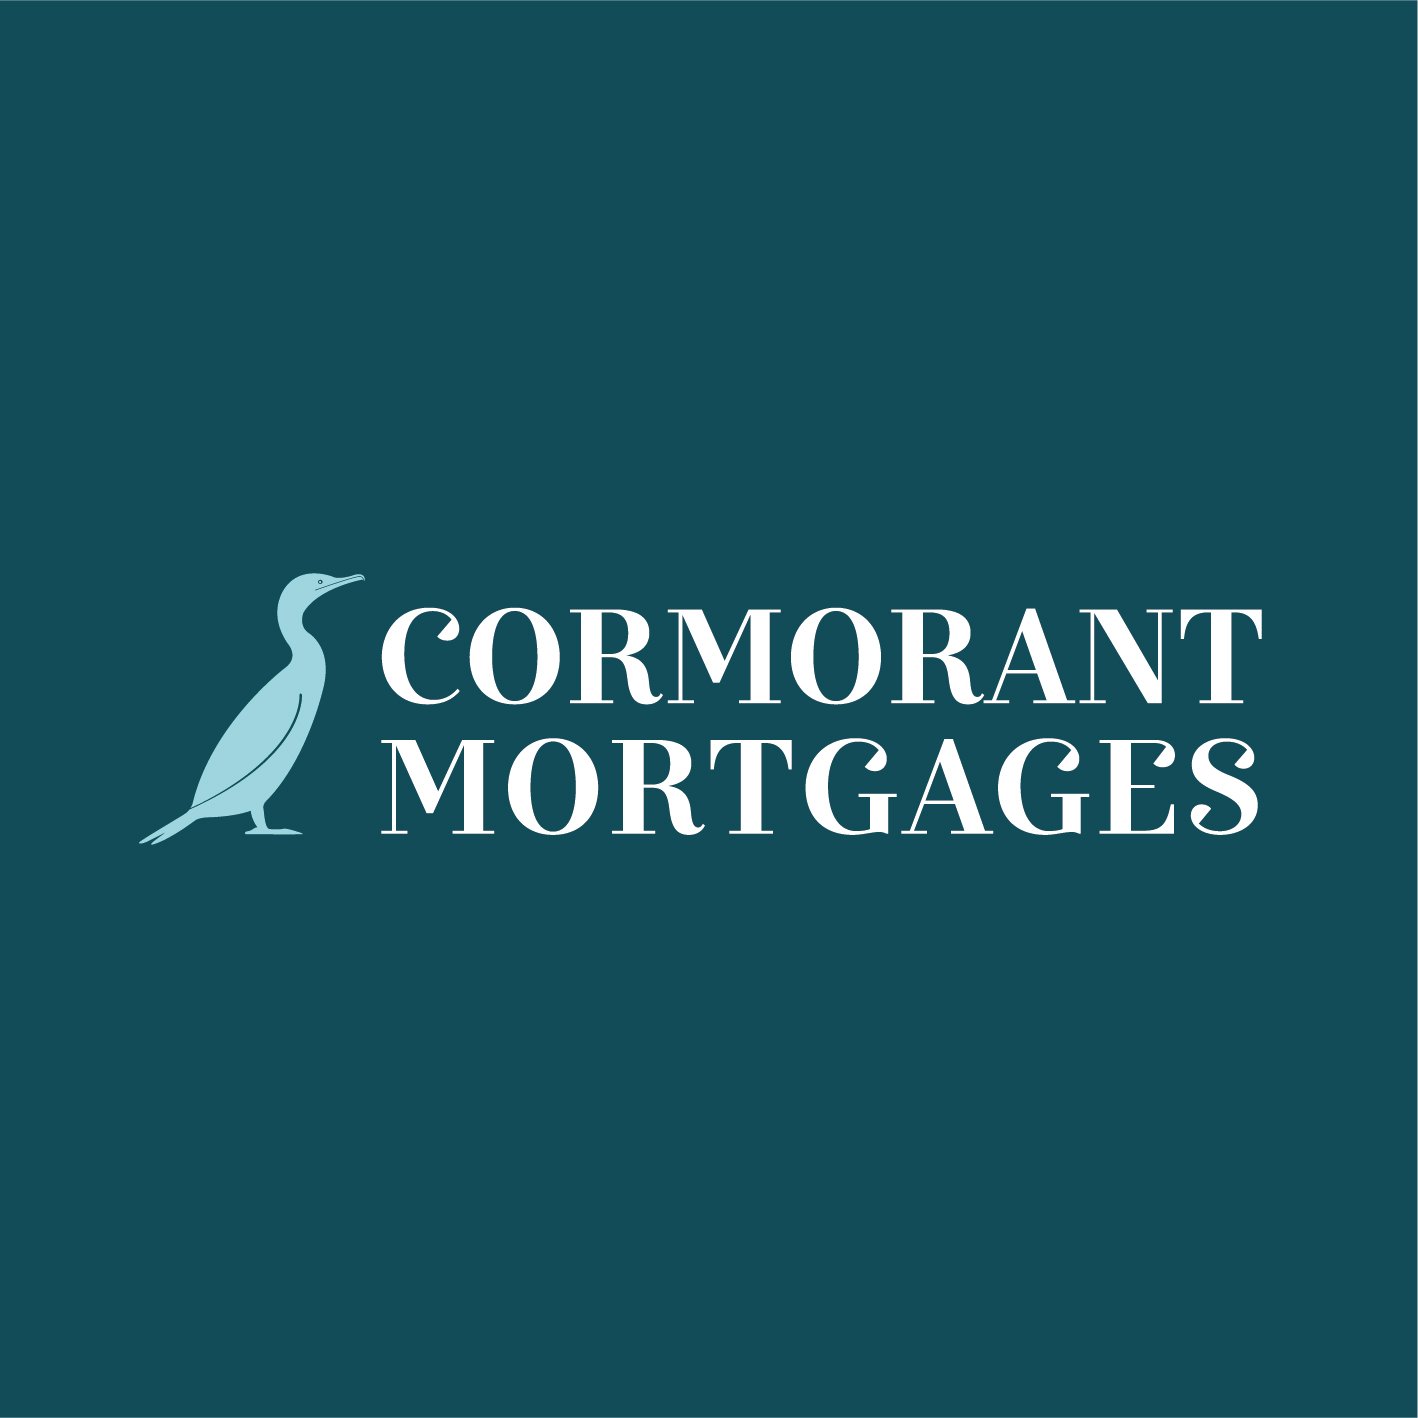 Cormorant Mortgages are whole of market for mortgages, advising on mortgages and protection. Our priorities are expert advice and excellent customer service.